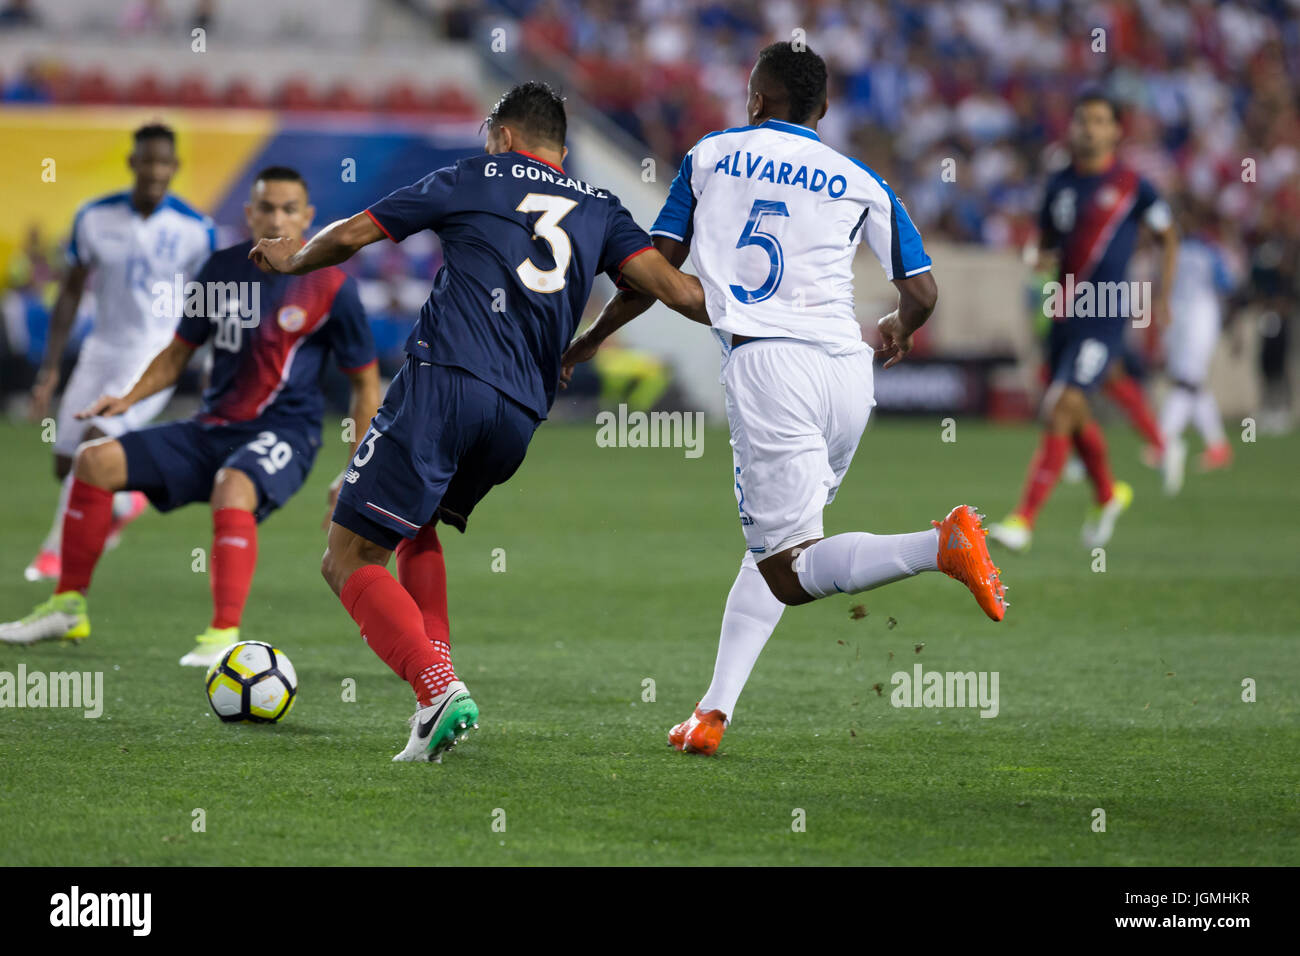 Harrison, NJ USA - July, 7, 2017: Giancarlo Gonzalez (3) of Costa Rica National team controls ball during CONCACAF Gold Cup group stage game against H Stock Photo